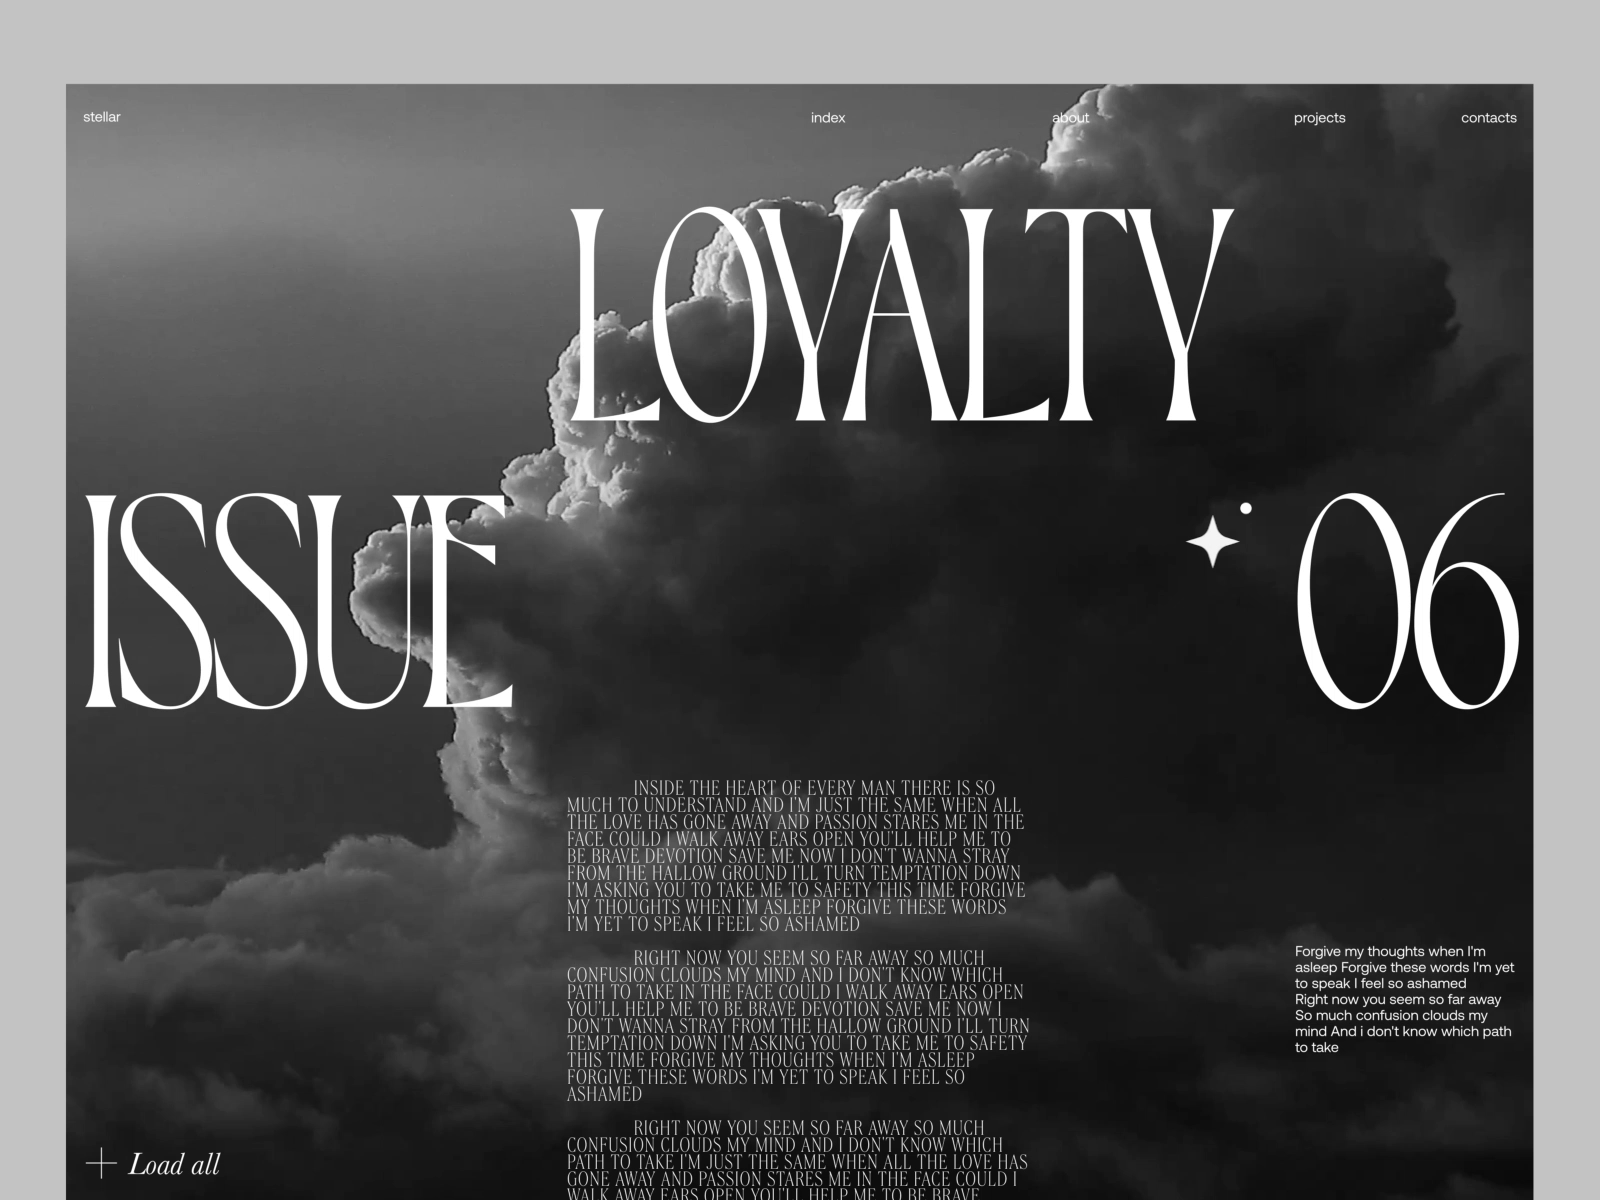 article-web-page-layout-by-tubik-on-dribbble